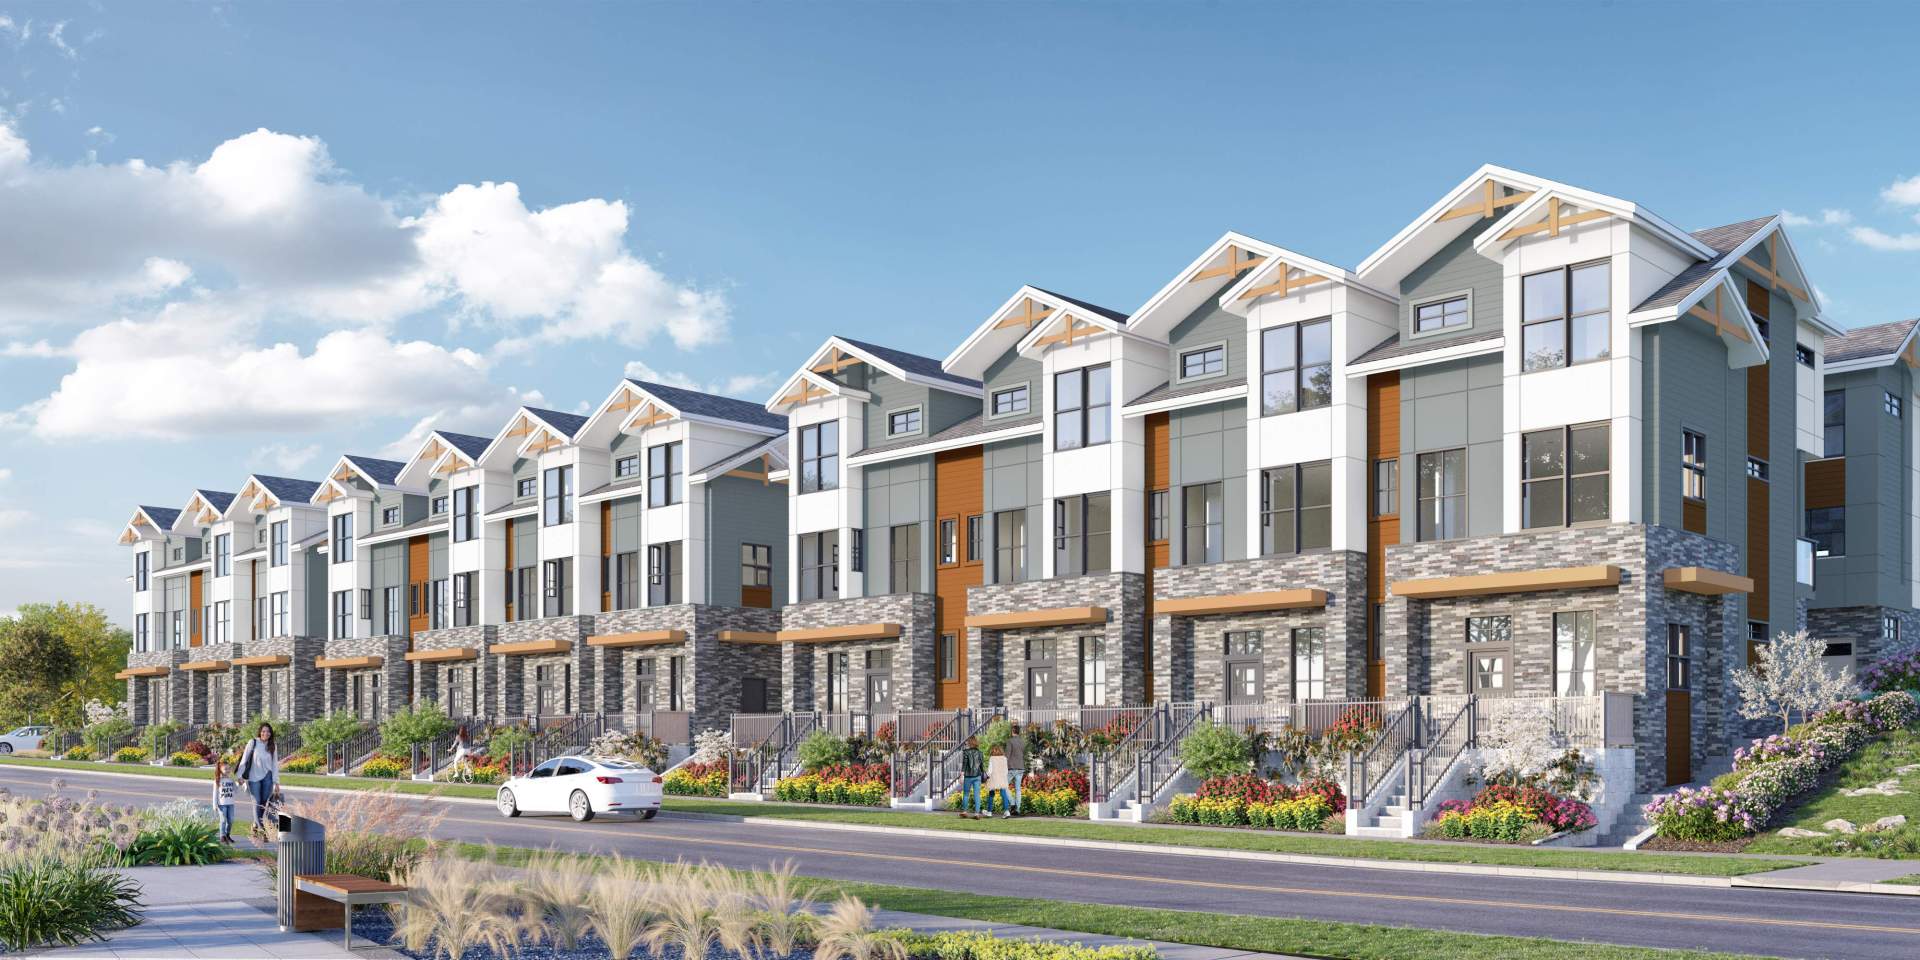 Harmony Townhomes by Apcon Group is a collection of 44 family-oriented residences.